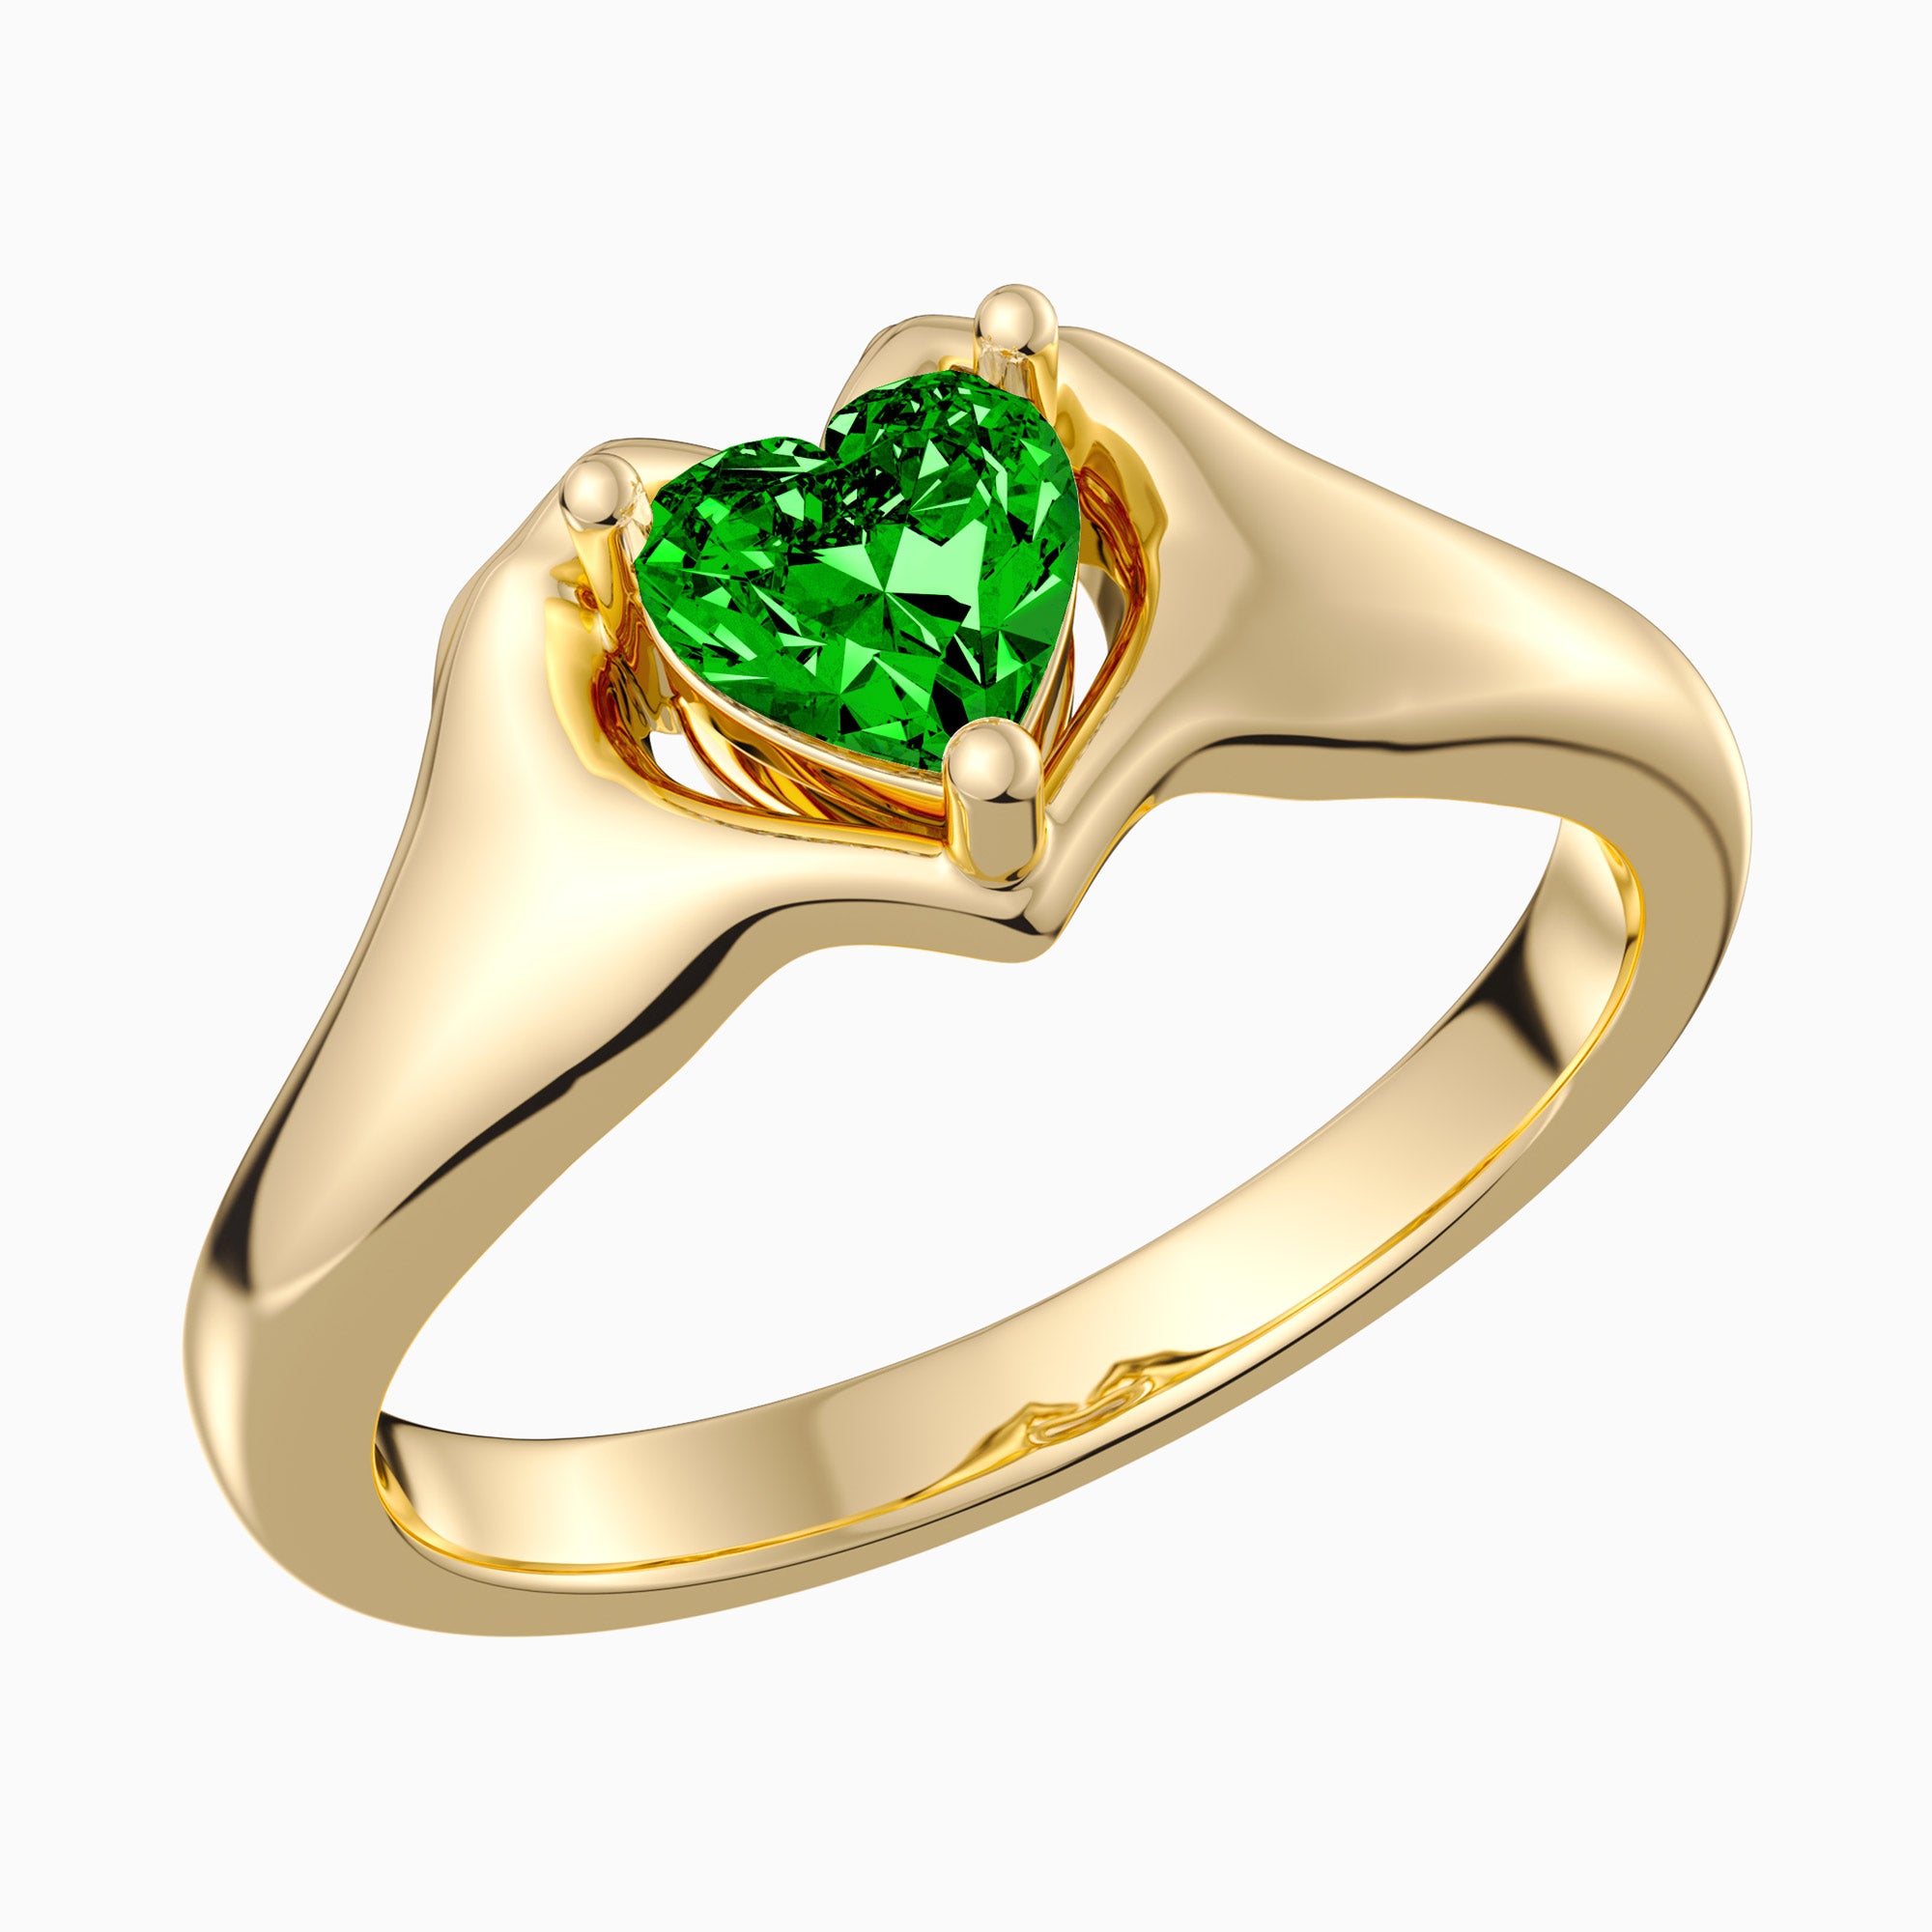 Embrace of Affection Love Statement Ring - vanimy